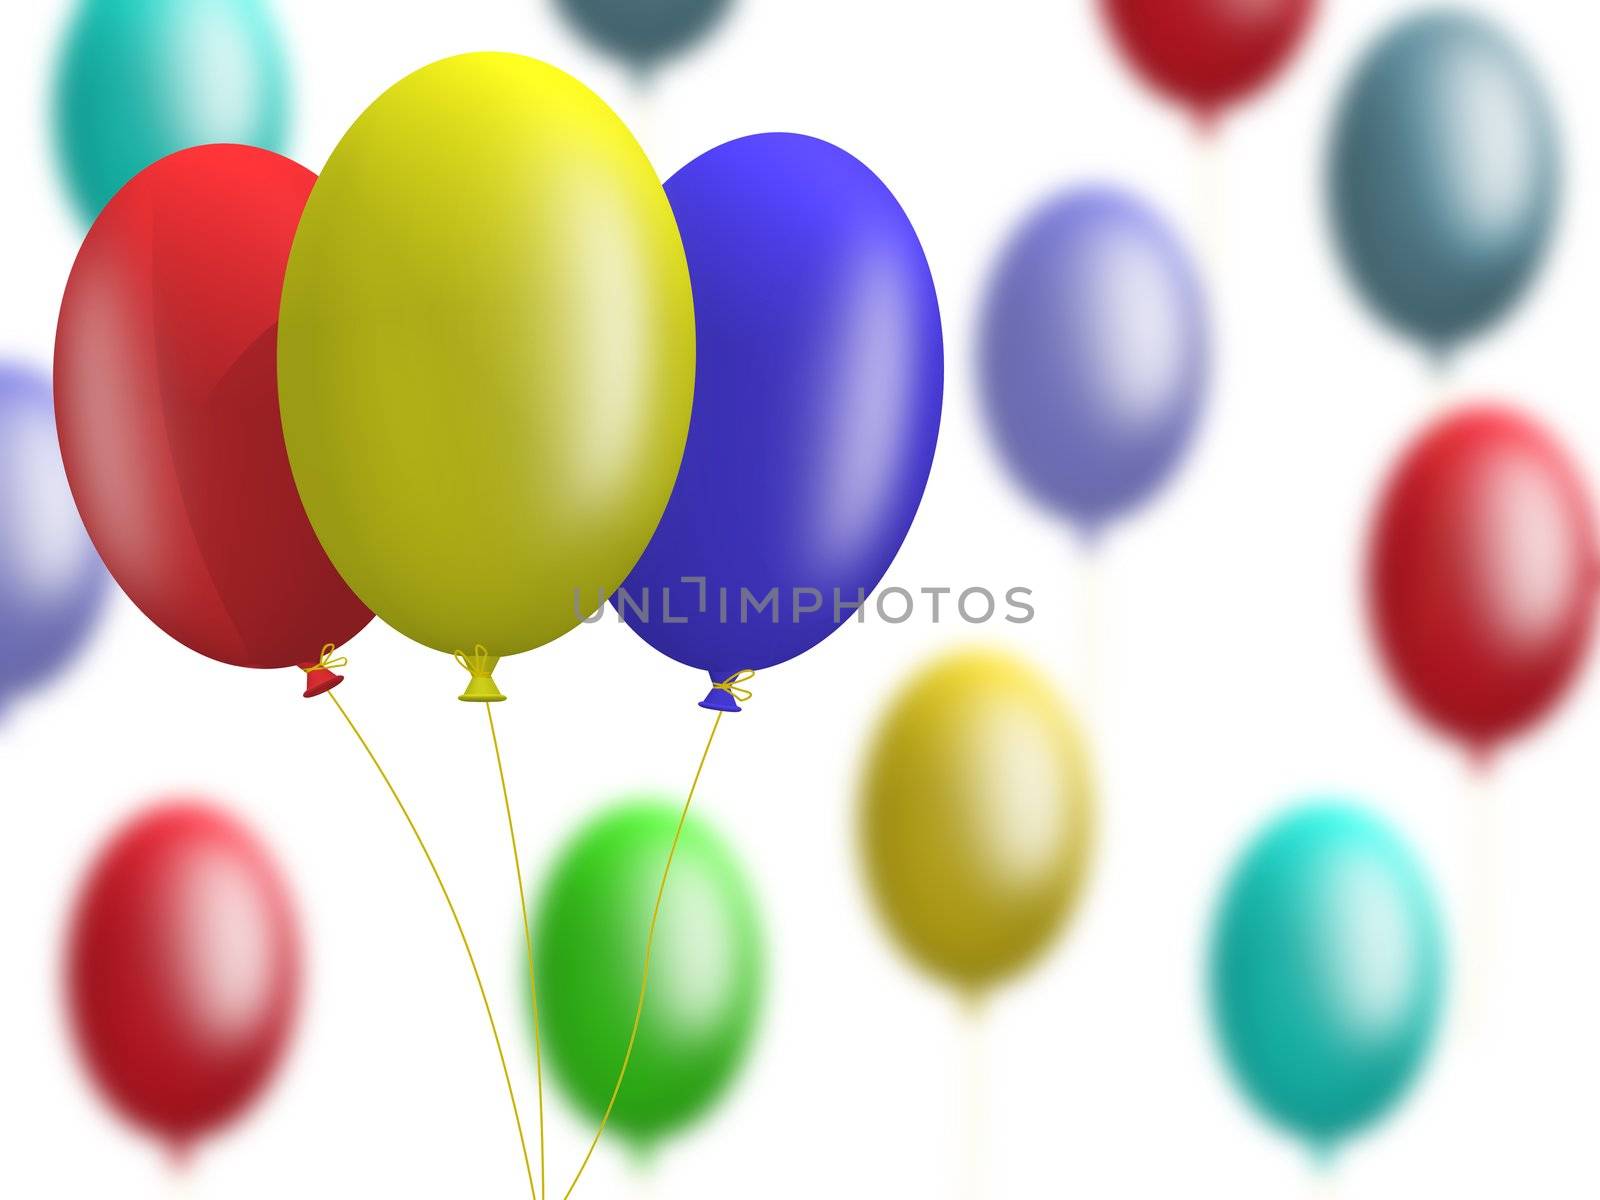 Balloons by galdzer